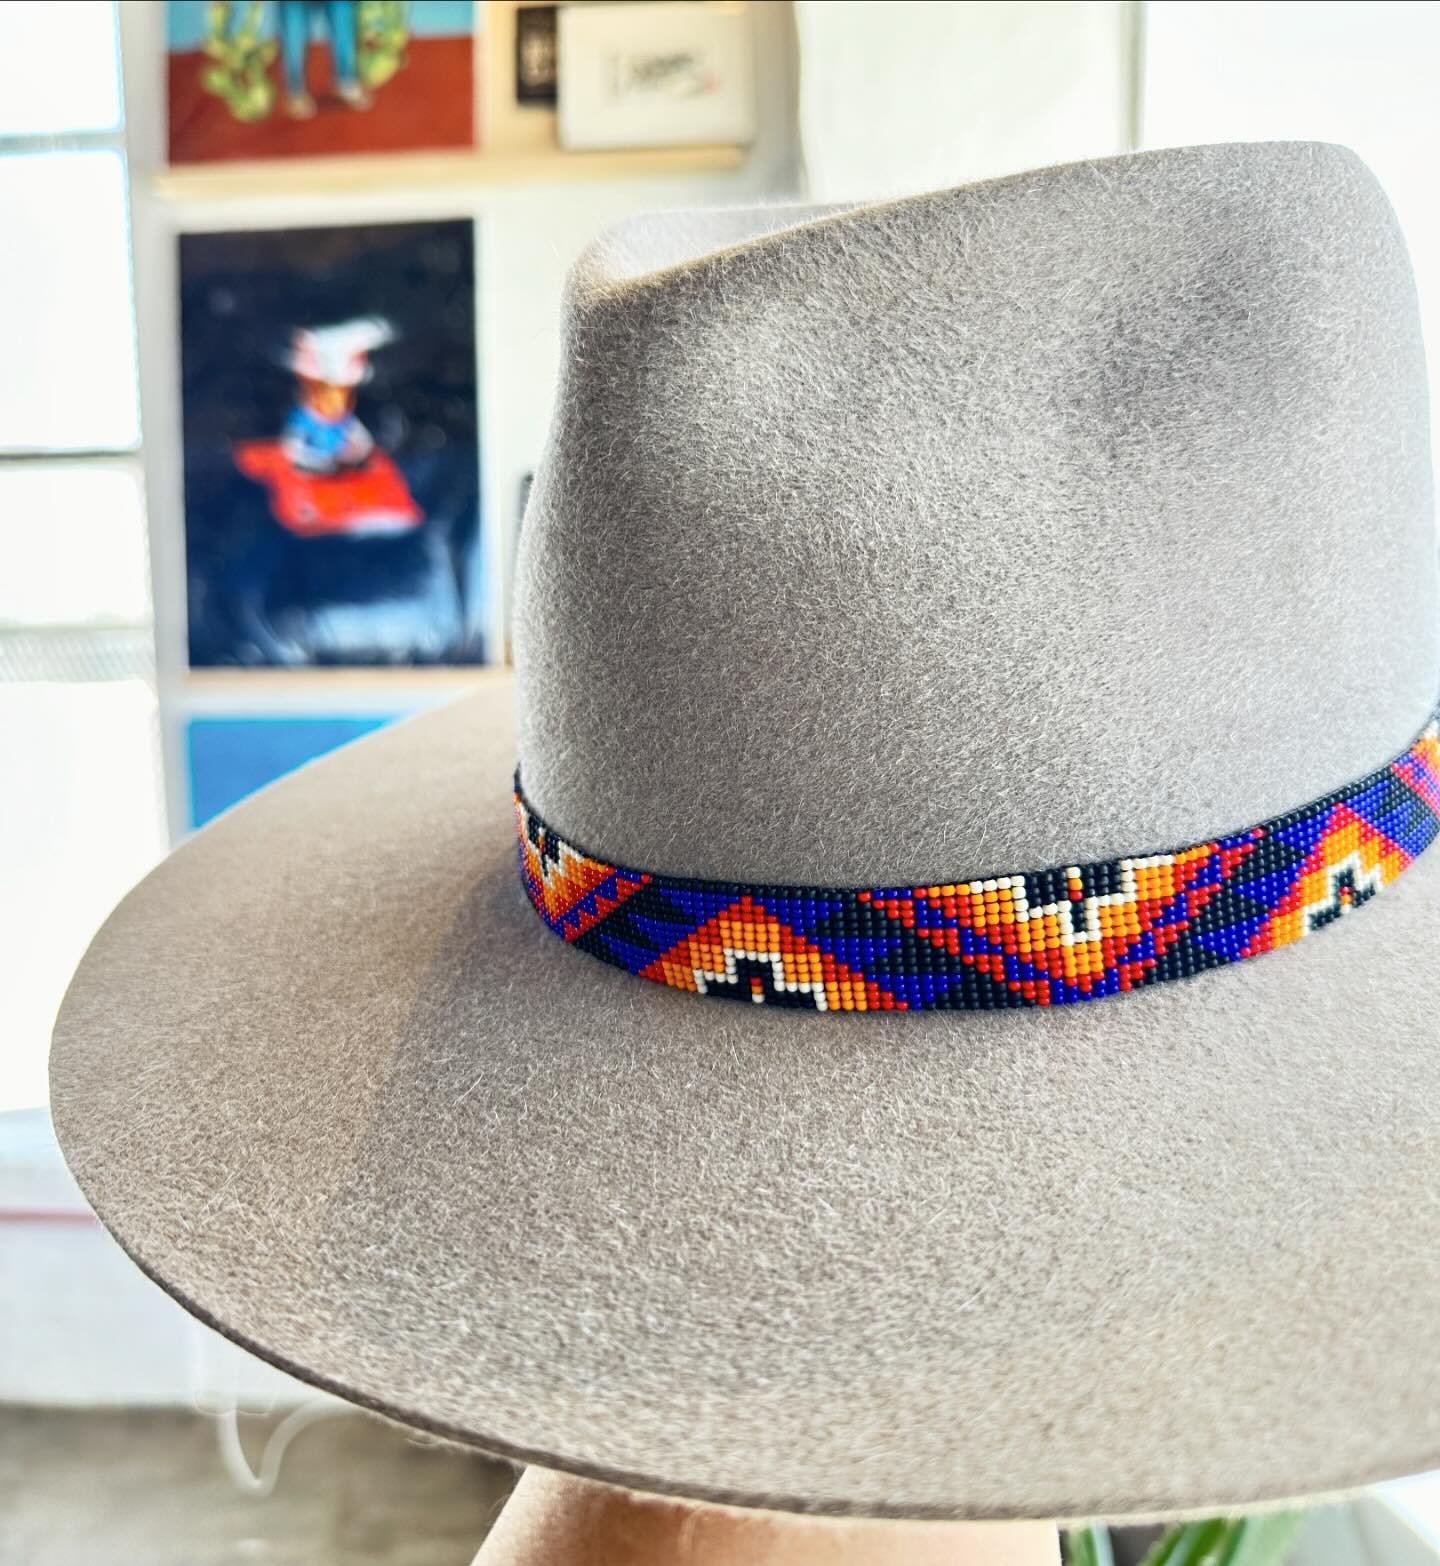 Another hand bead woven hat band&hellip; color switch up
#beadsoverdiamonds
#beadworker
#beadweaverofelpaso
#aghaahatco
#hatmakerofelpaso 
#hatmakerofelpasotx 
#thatbeadlife